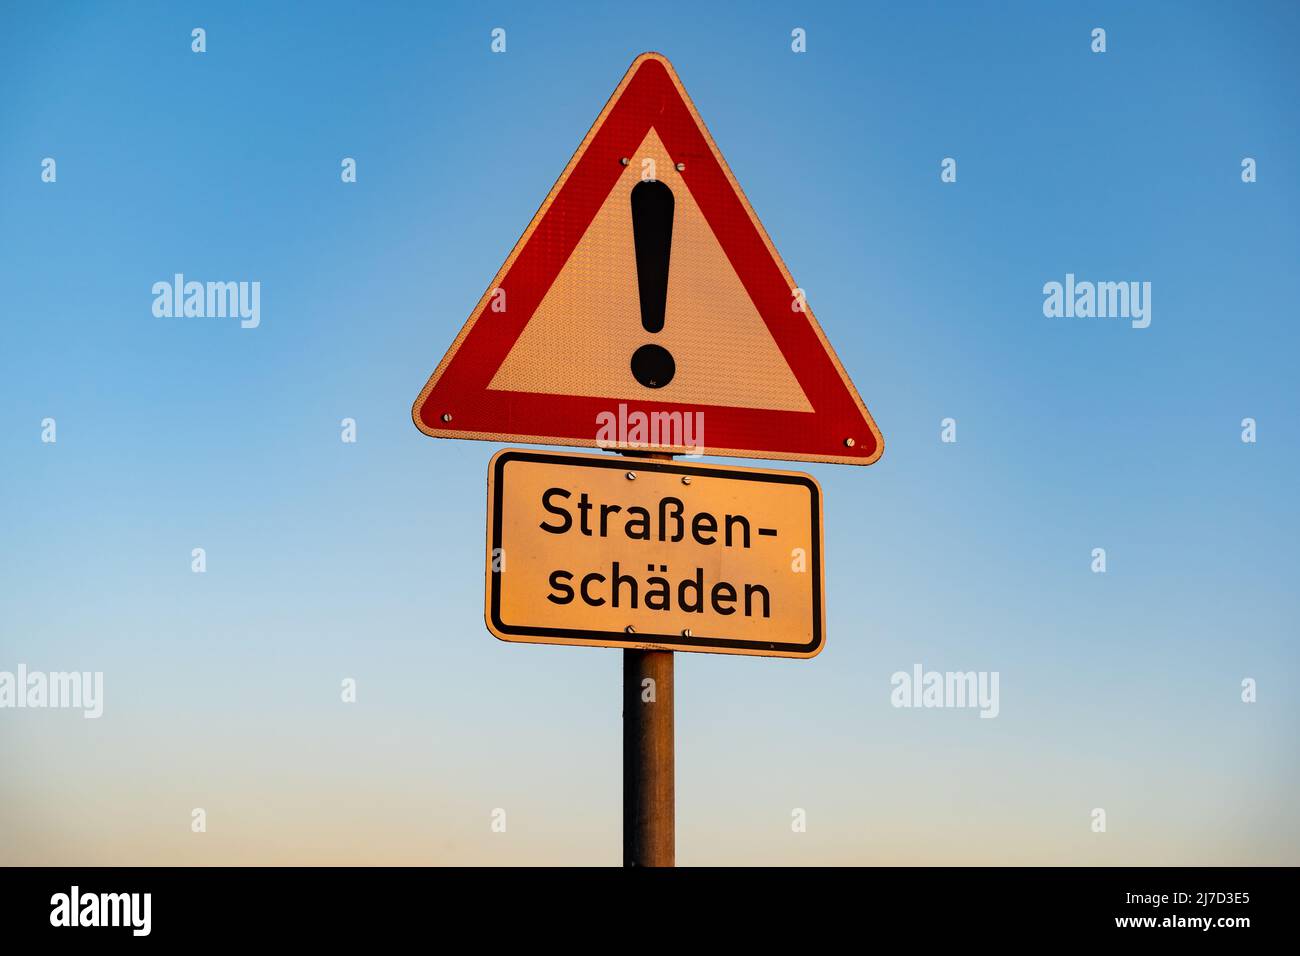 Road sign with a warning against road damages. In German language it says 'Straßenschäden' which should slow down the traffic because of a bumpy road. Stock Photo